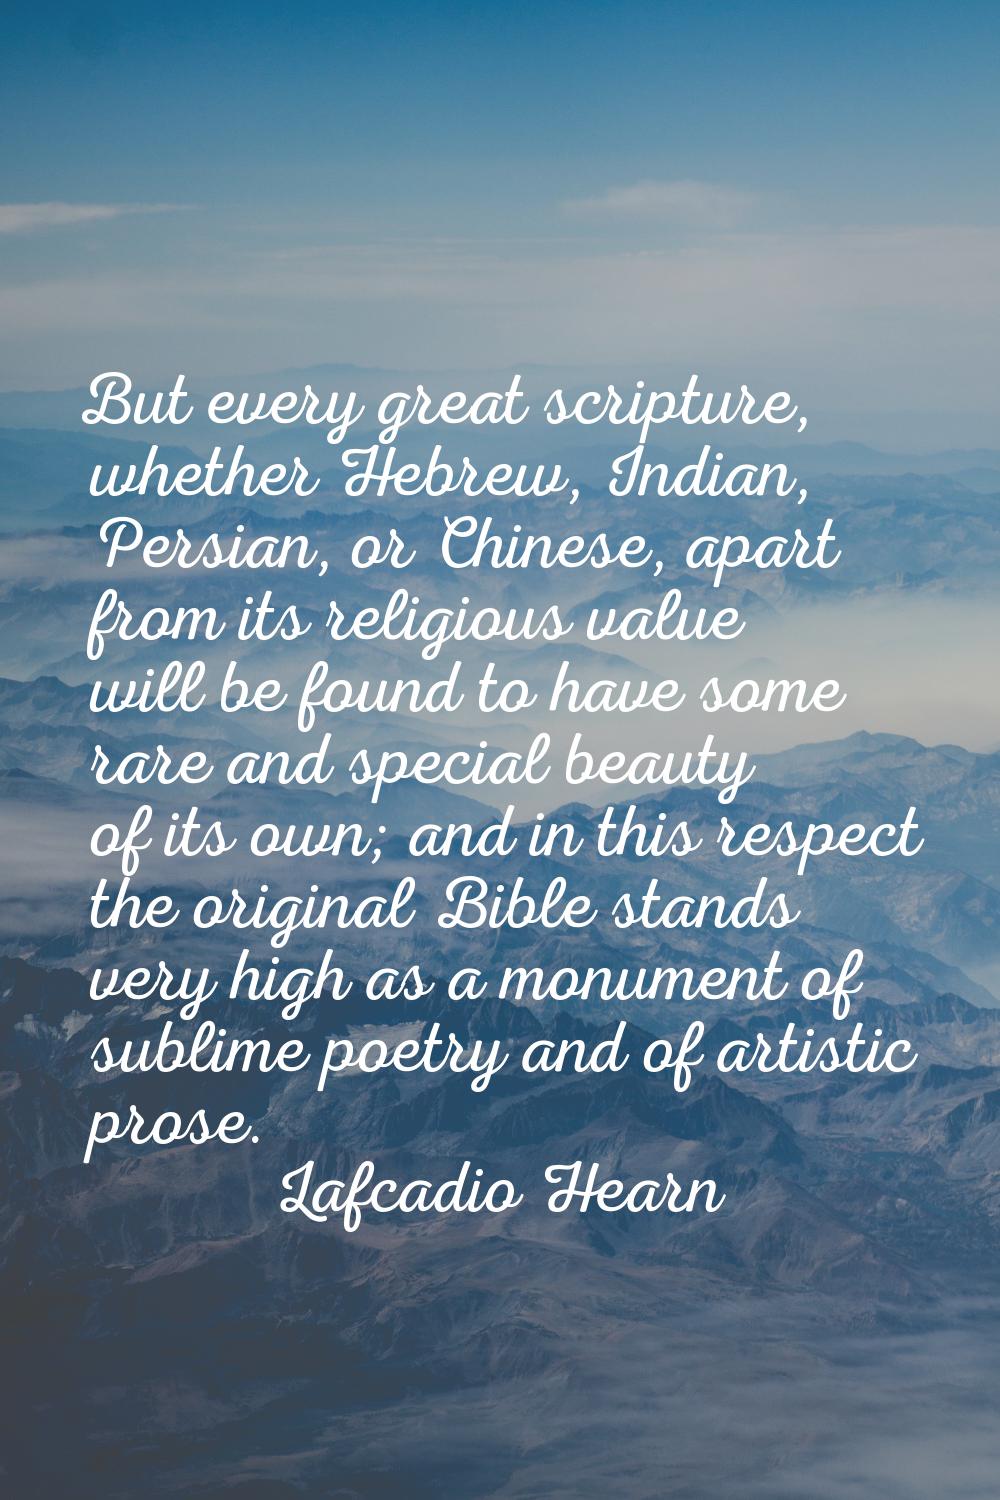 But every great scripture, whether Hebrew, Indian, Persian, or Chinese, apart from its religious va